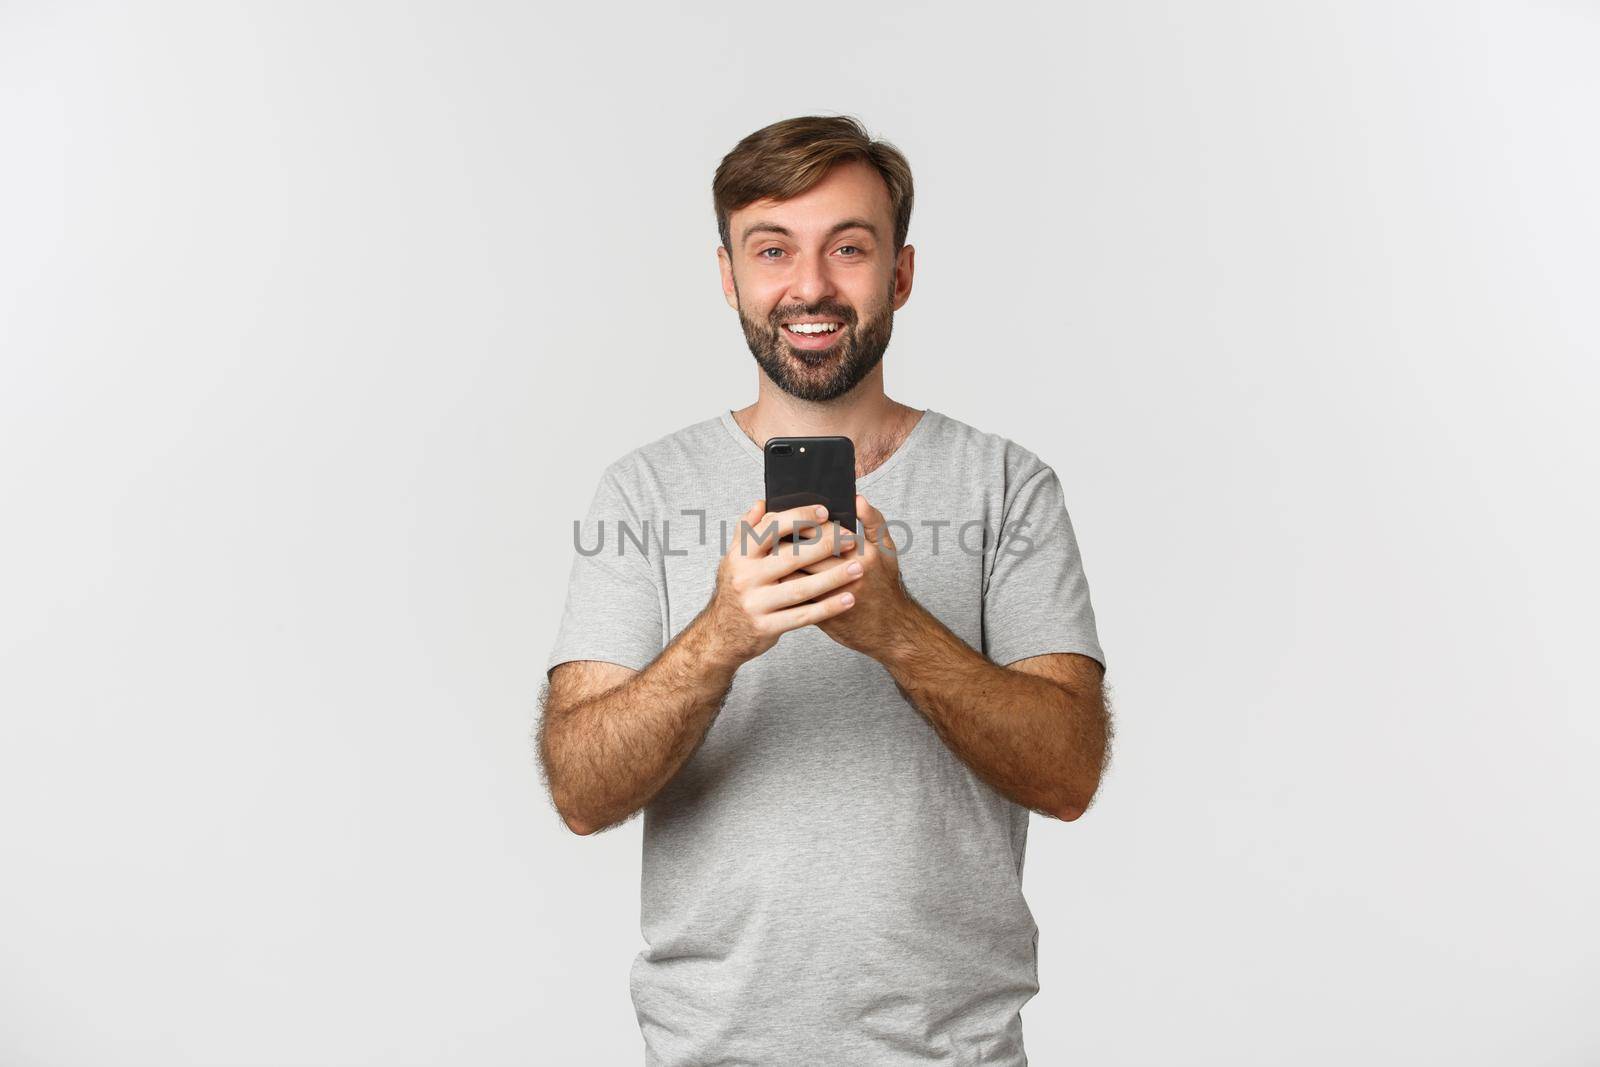 Smiling guy with beard, taking pictures or recording video on mobile phone, standing over white background.